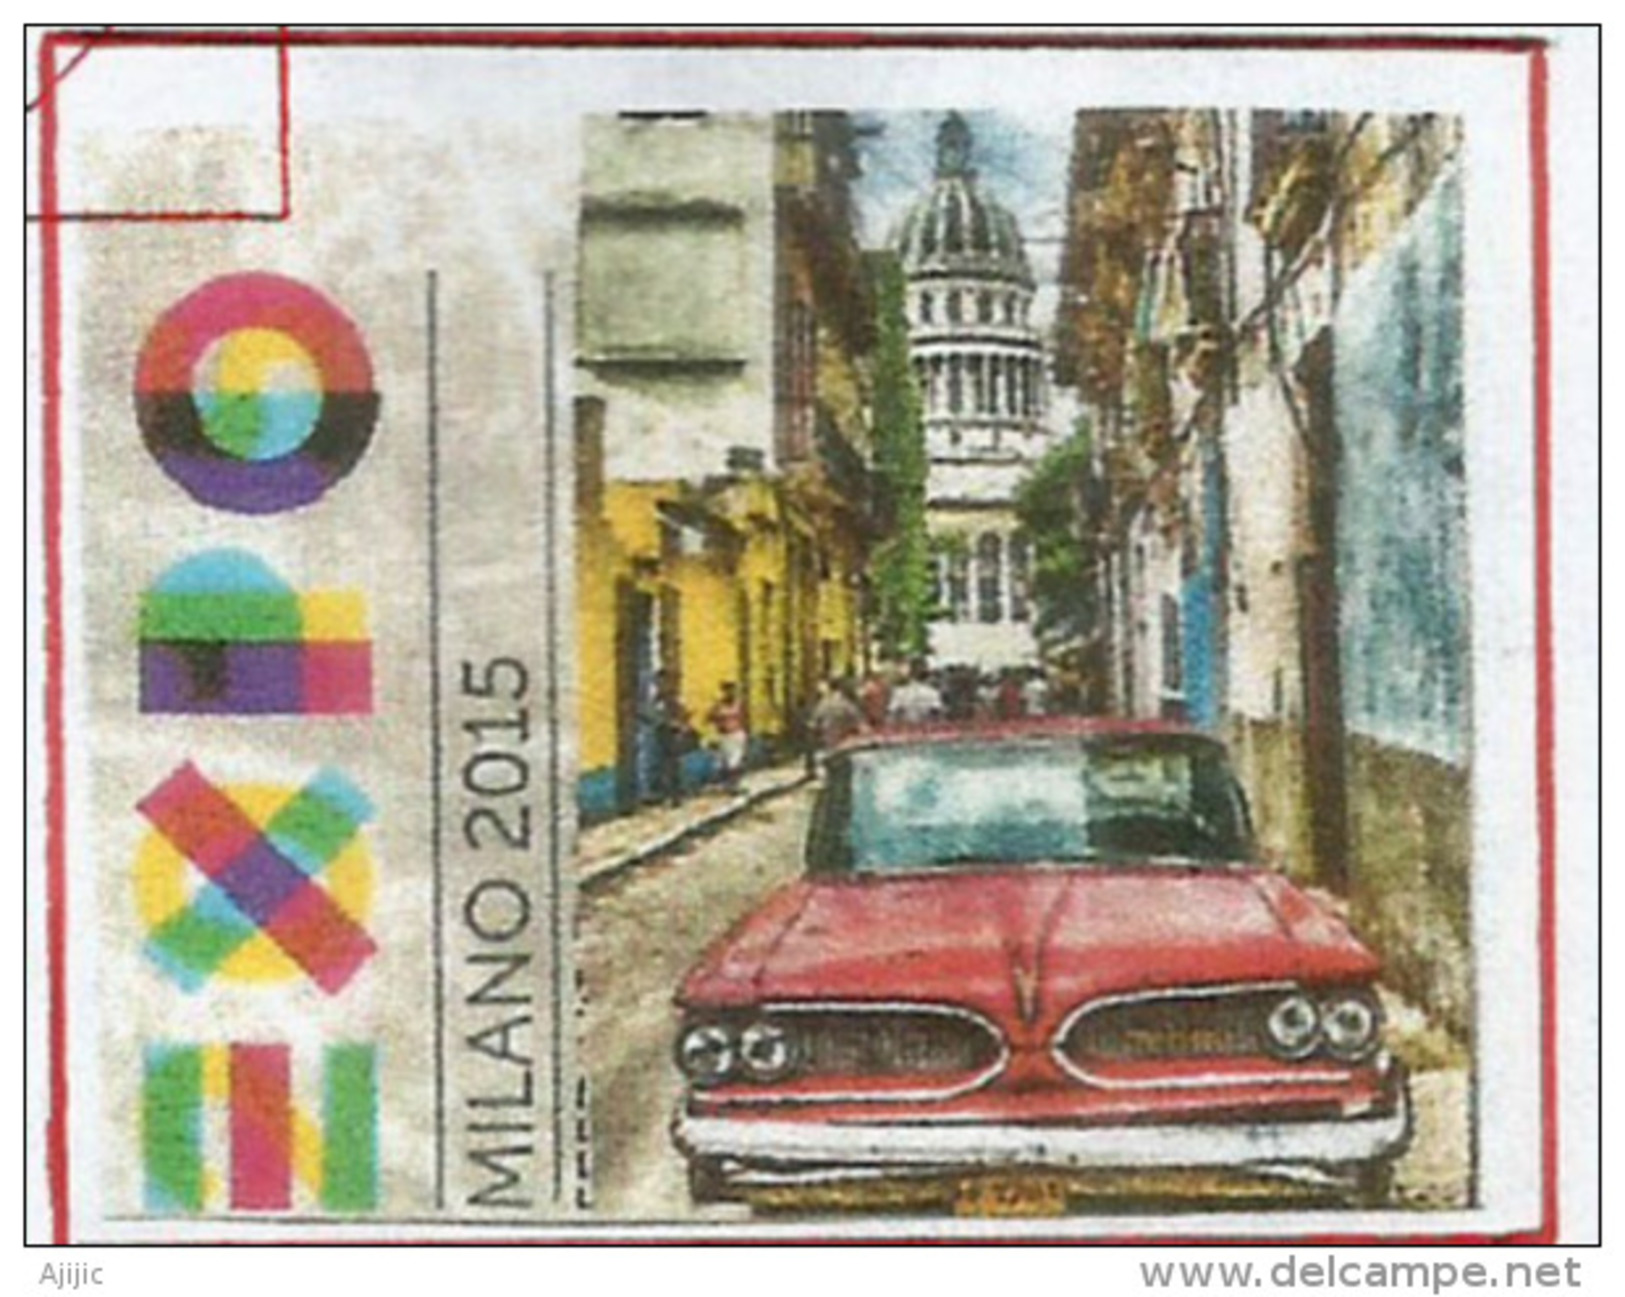 CUBA. UNIVERSAL EXPO MILANO 2015 .Letter From The Cuba Pavilion With Stamp Of Cuba + Official Stamps Pavilion + EXPO - Covers & Documents